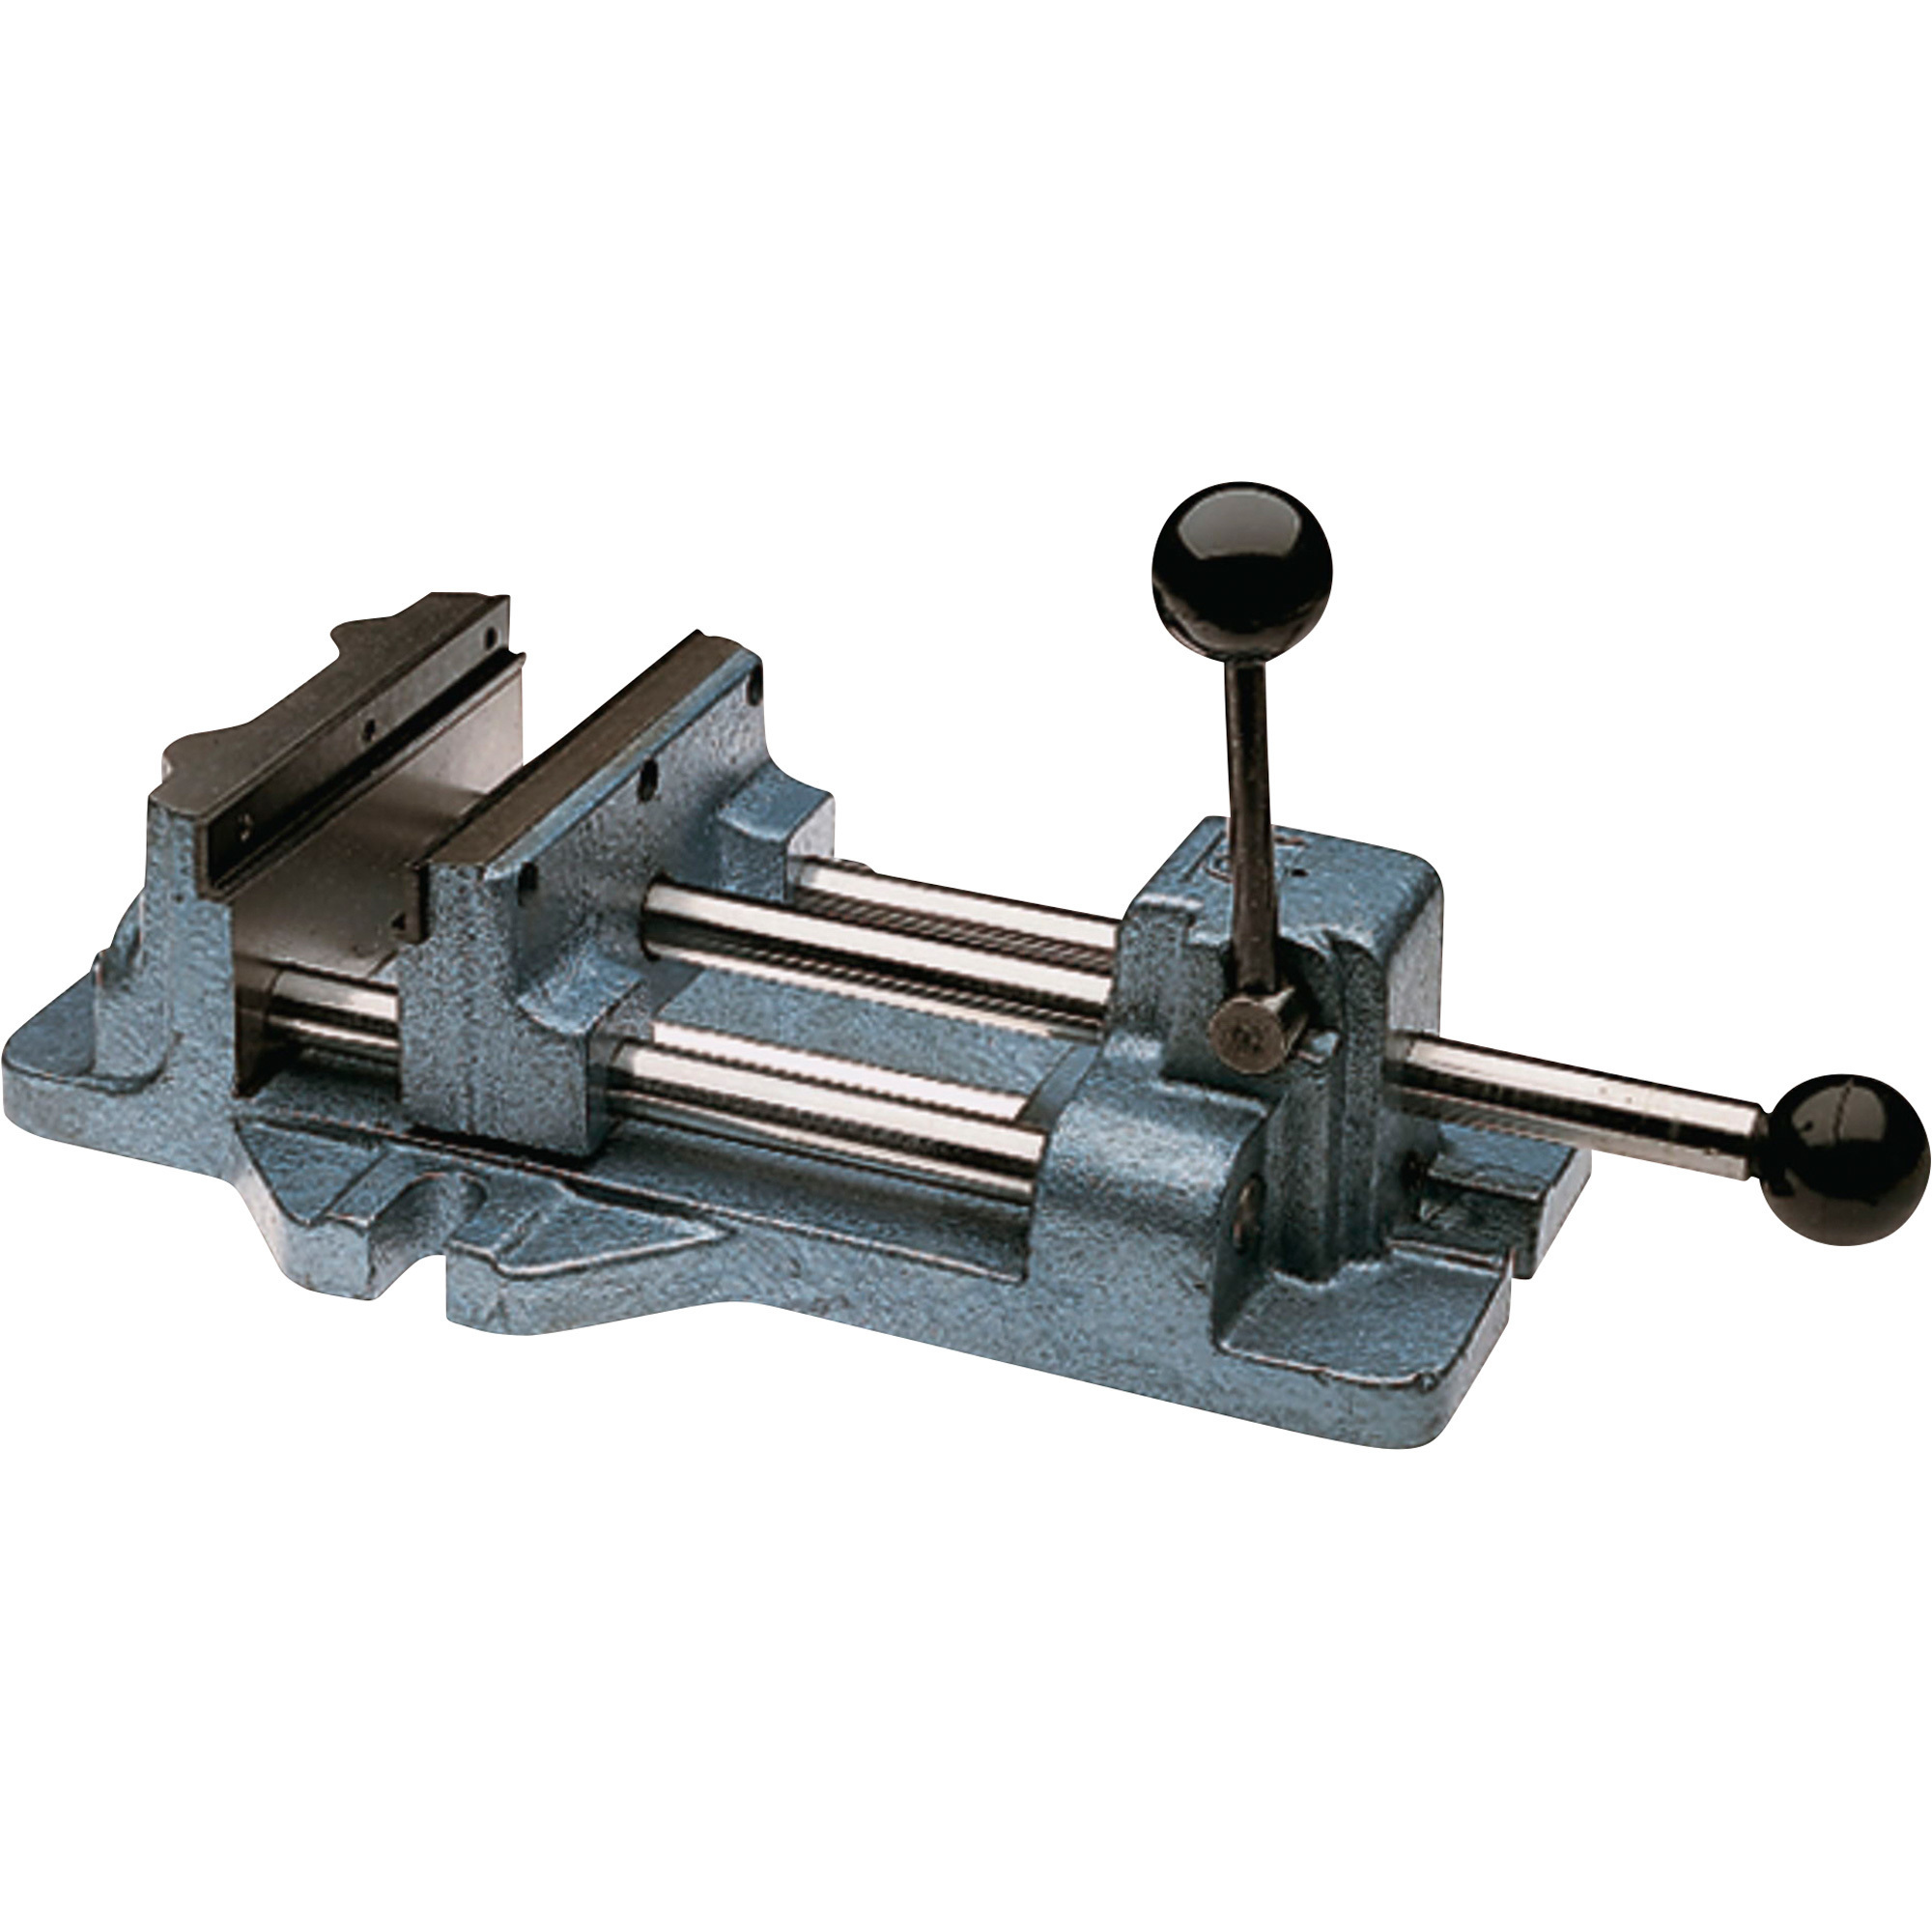 Wilton Cam Action Drill Press Vise, 6Inch Jaw Width, Model 1206